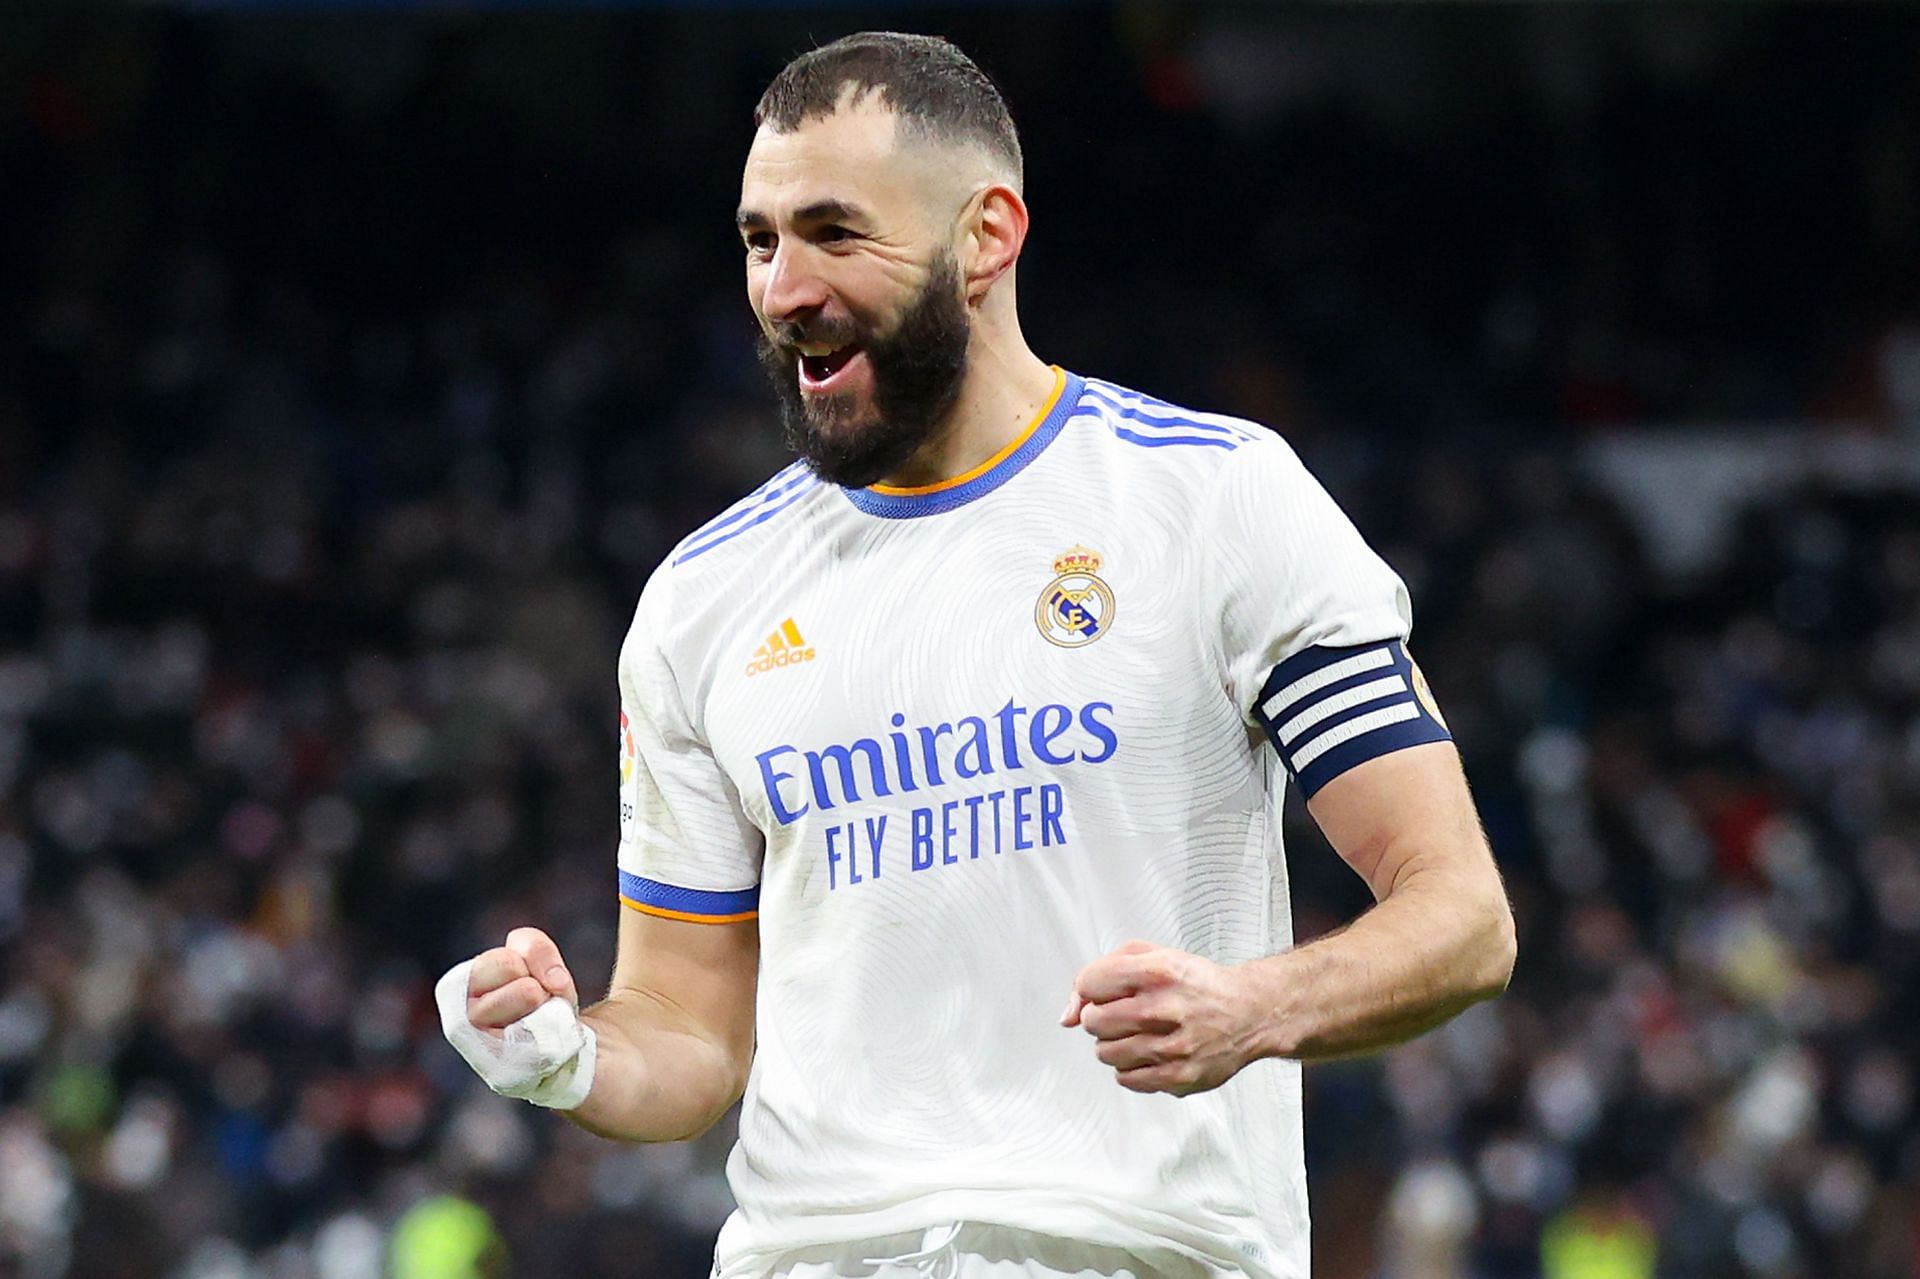 Karim Benzema has won the Champions League four times with Real Madrid